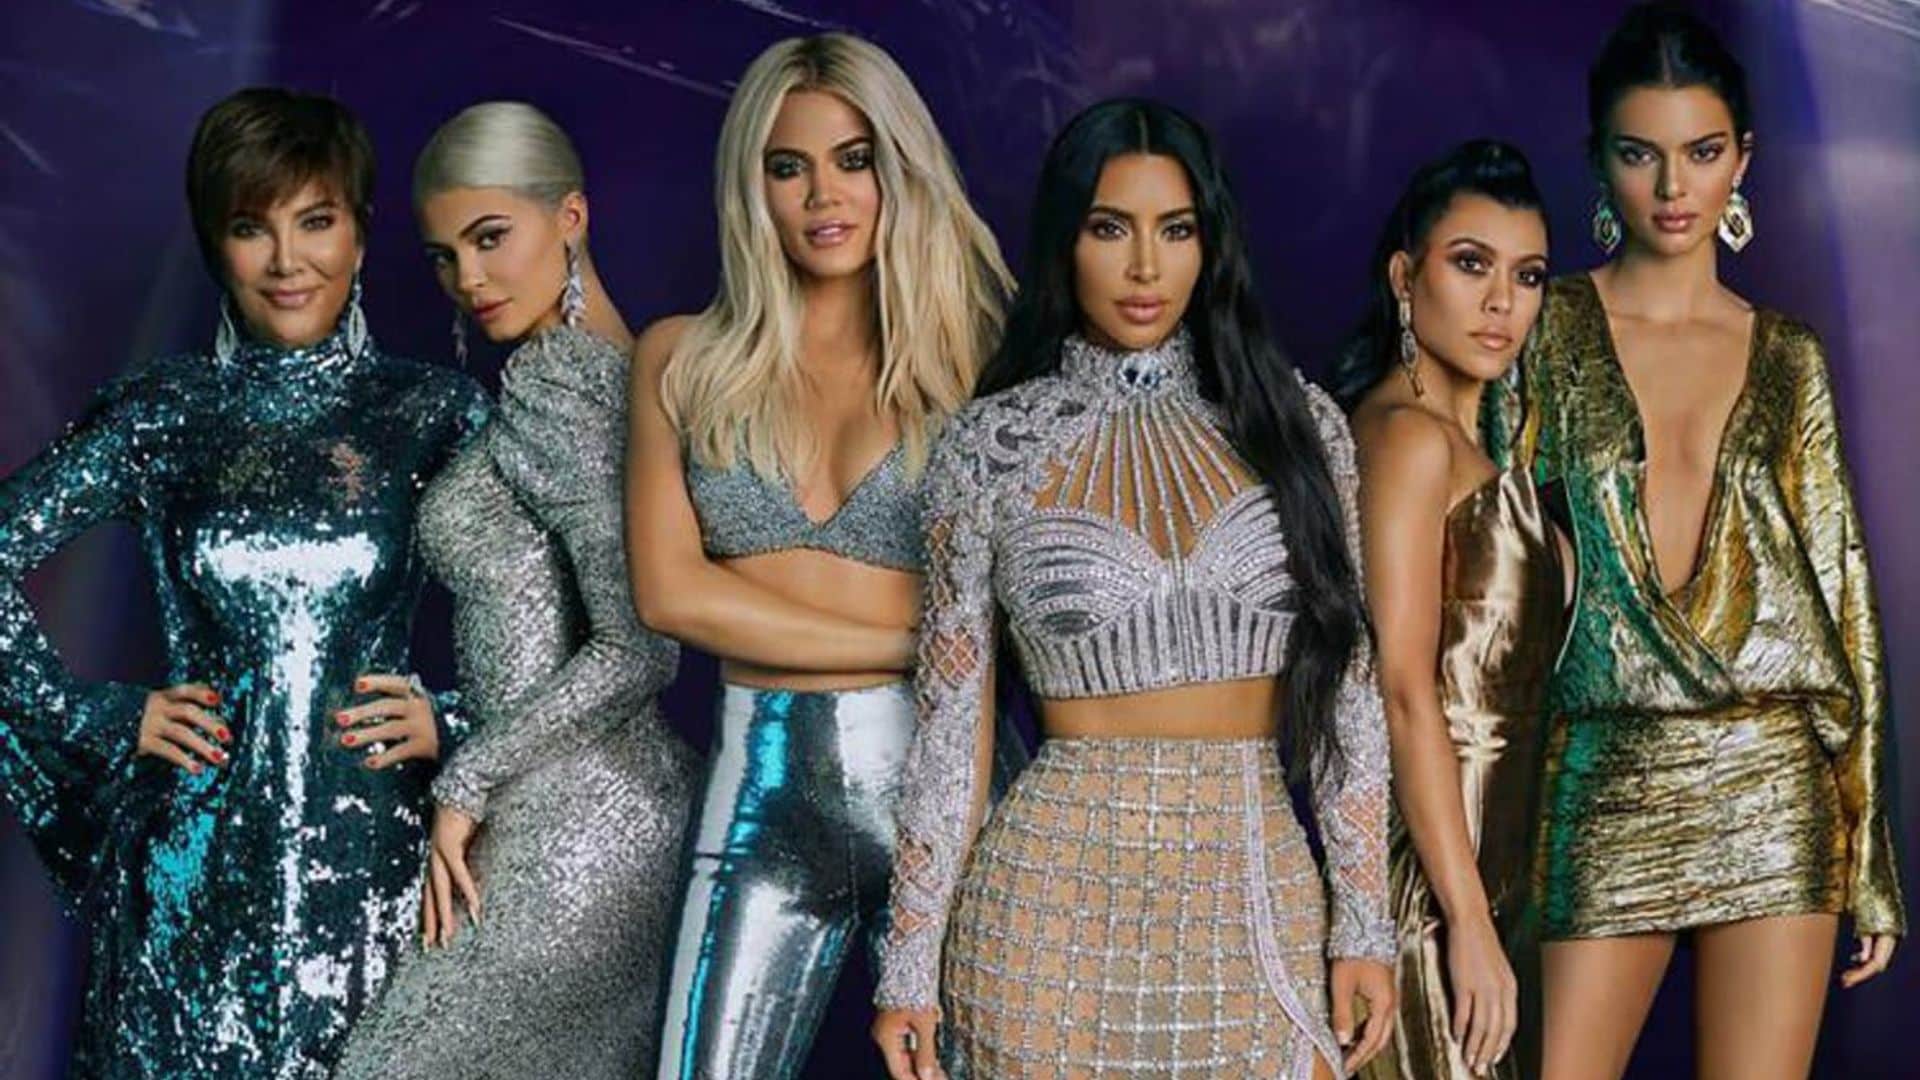 Kim Kardashian and sisters spend $300k on watches for KUWTK crew